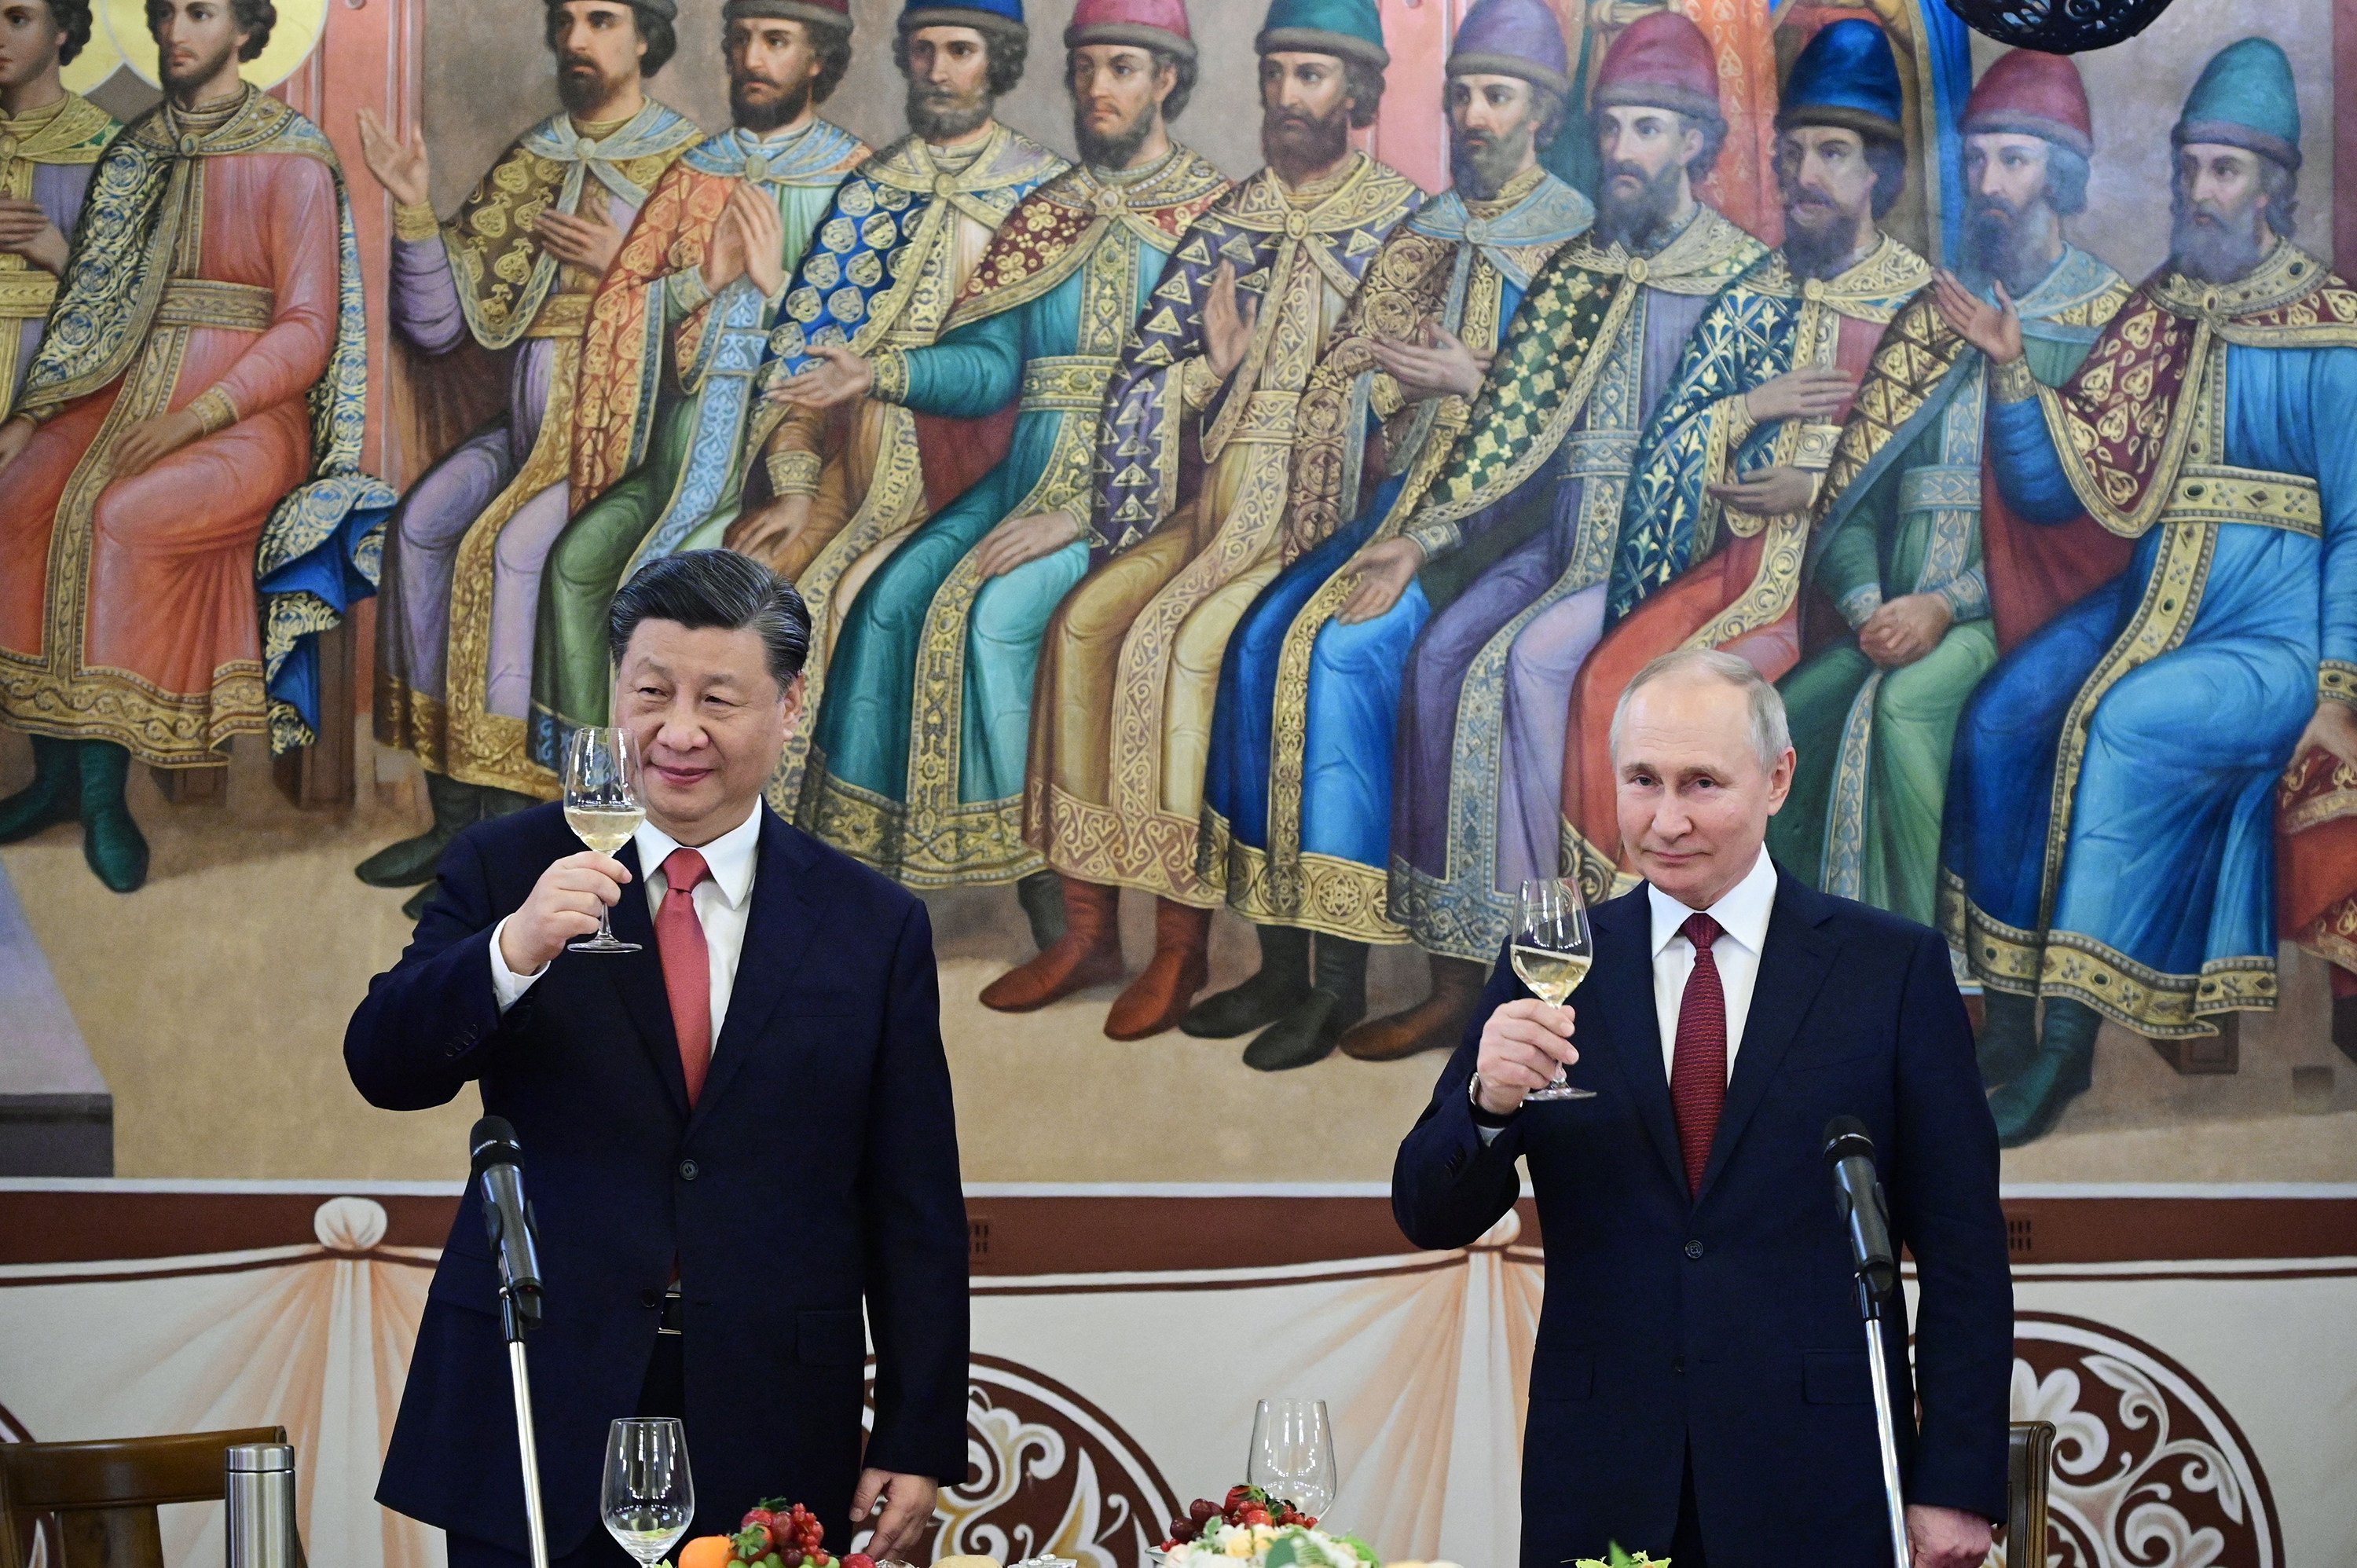 President Xi Jinping (left) and Russian President Vladimir Putin hold a toast during a reception following their talks at the Kremlin in Moscow on March 21. While the diplomatic and security aspects of the talks have received a great deal of attention, economic cooperation is an equally important part of the China-Russia relationship. Photo: AFP